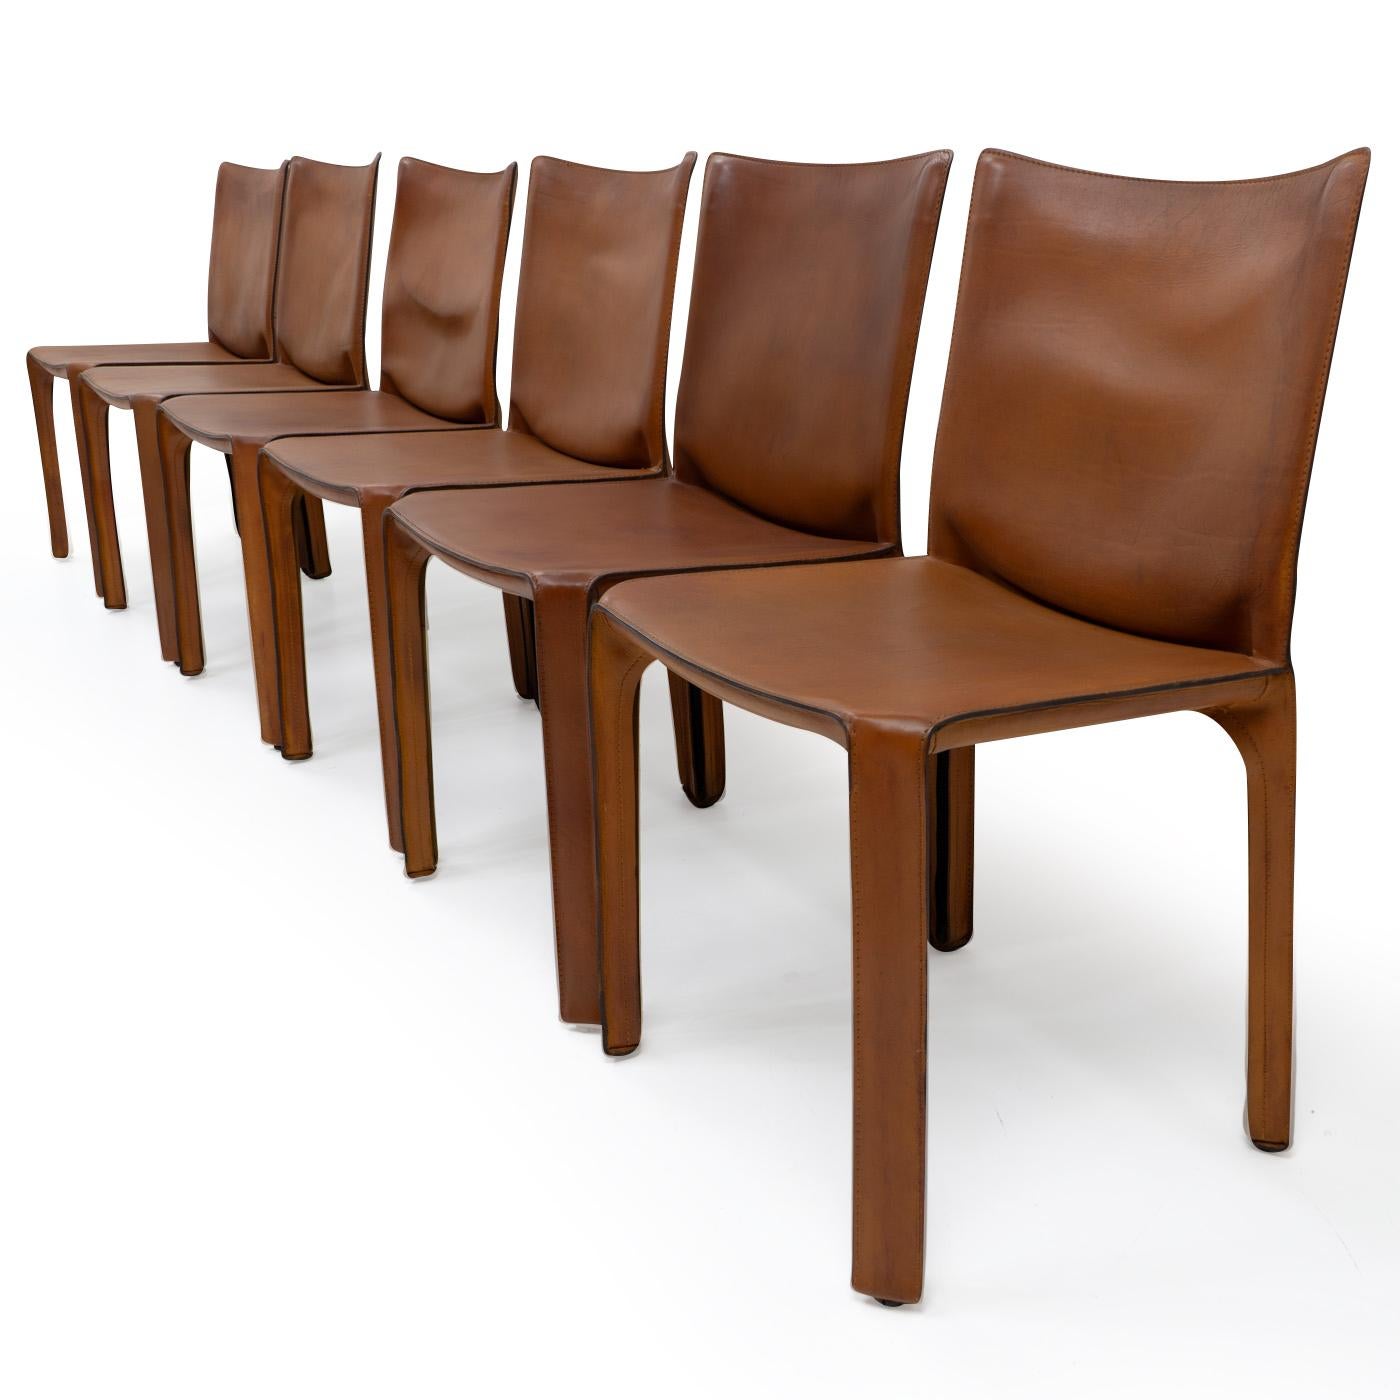 Mid-Century Modern Italian Design Classic Cab 412 Chairs by Mario Bellini for Cassina, Set of Six For Sale